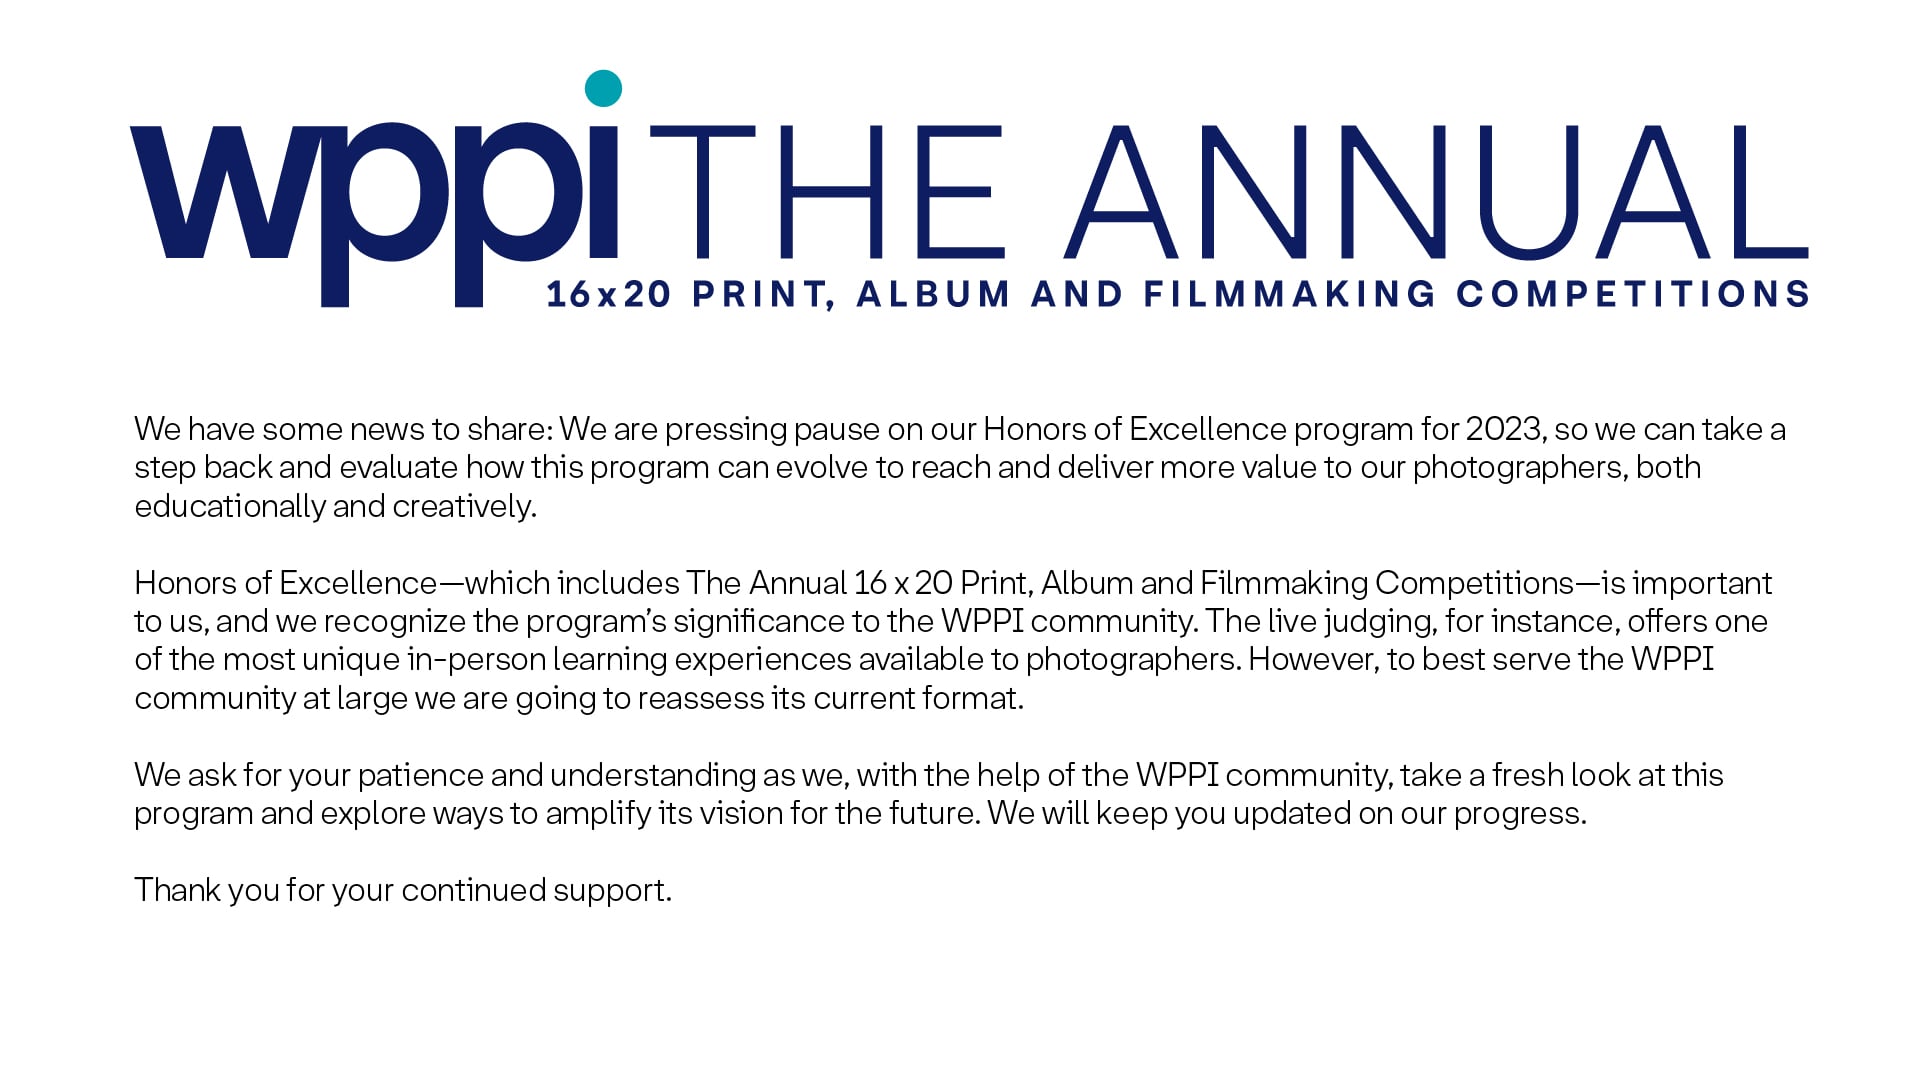 WPPI The Annual 2022